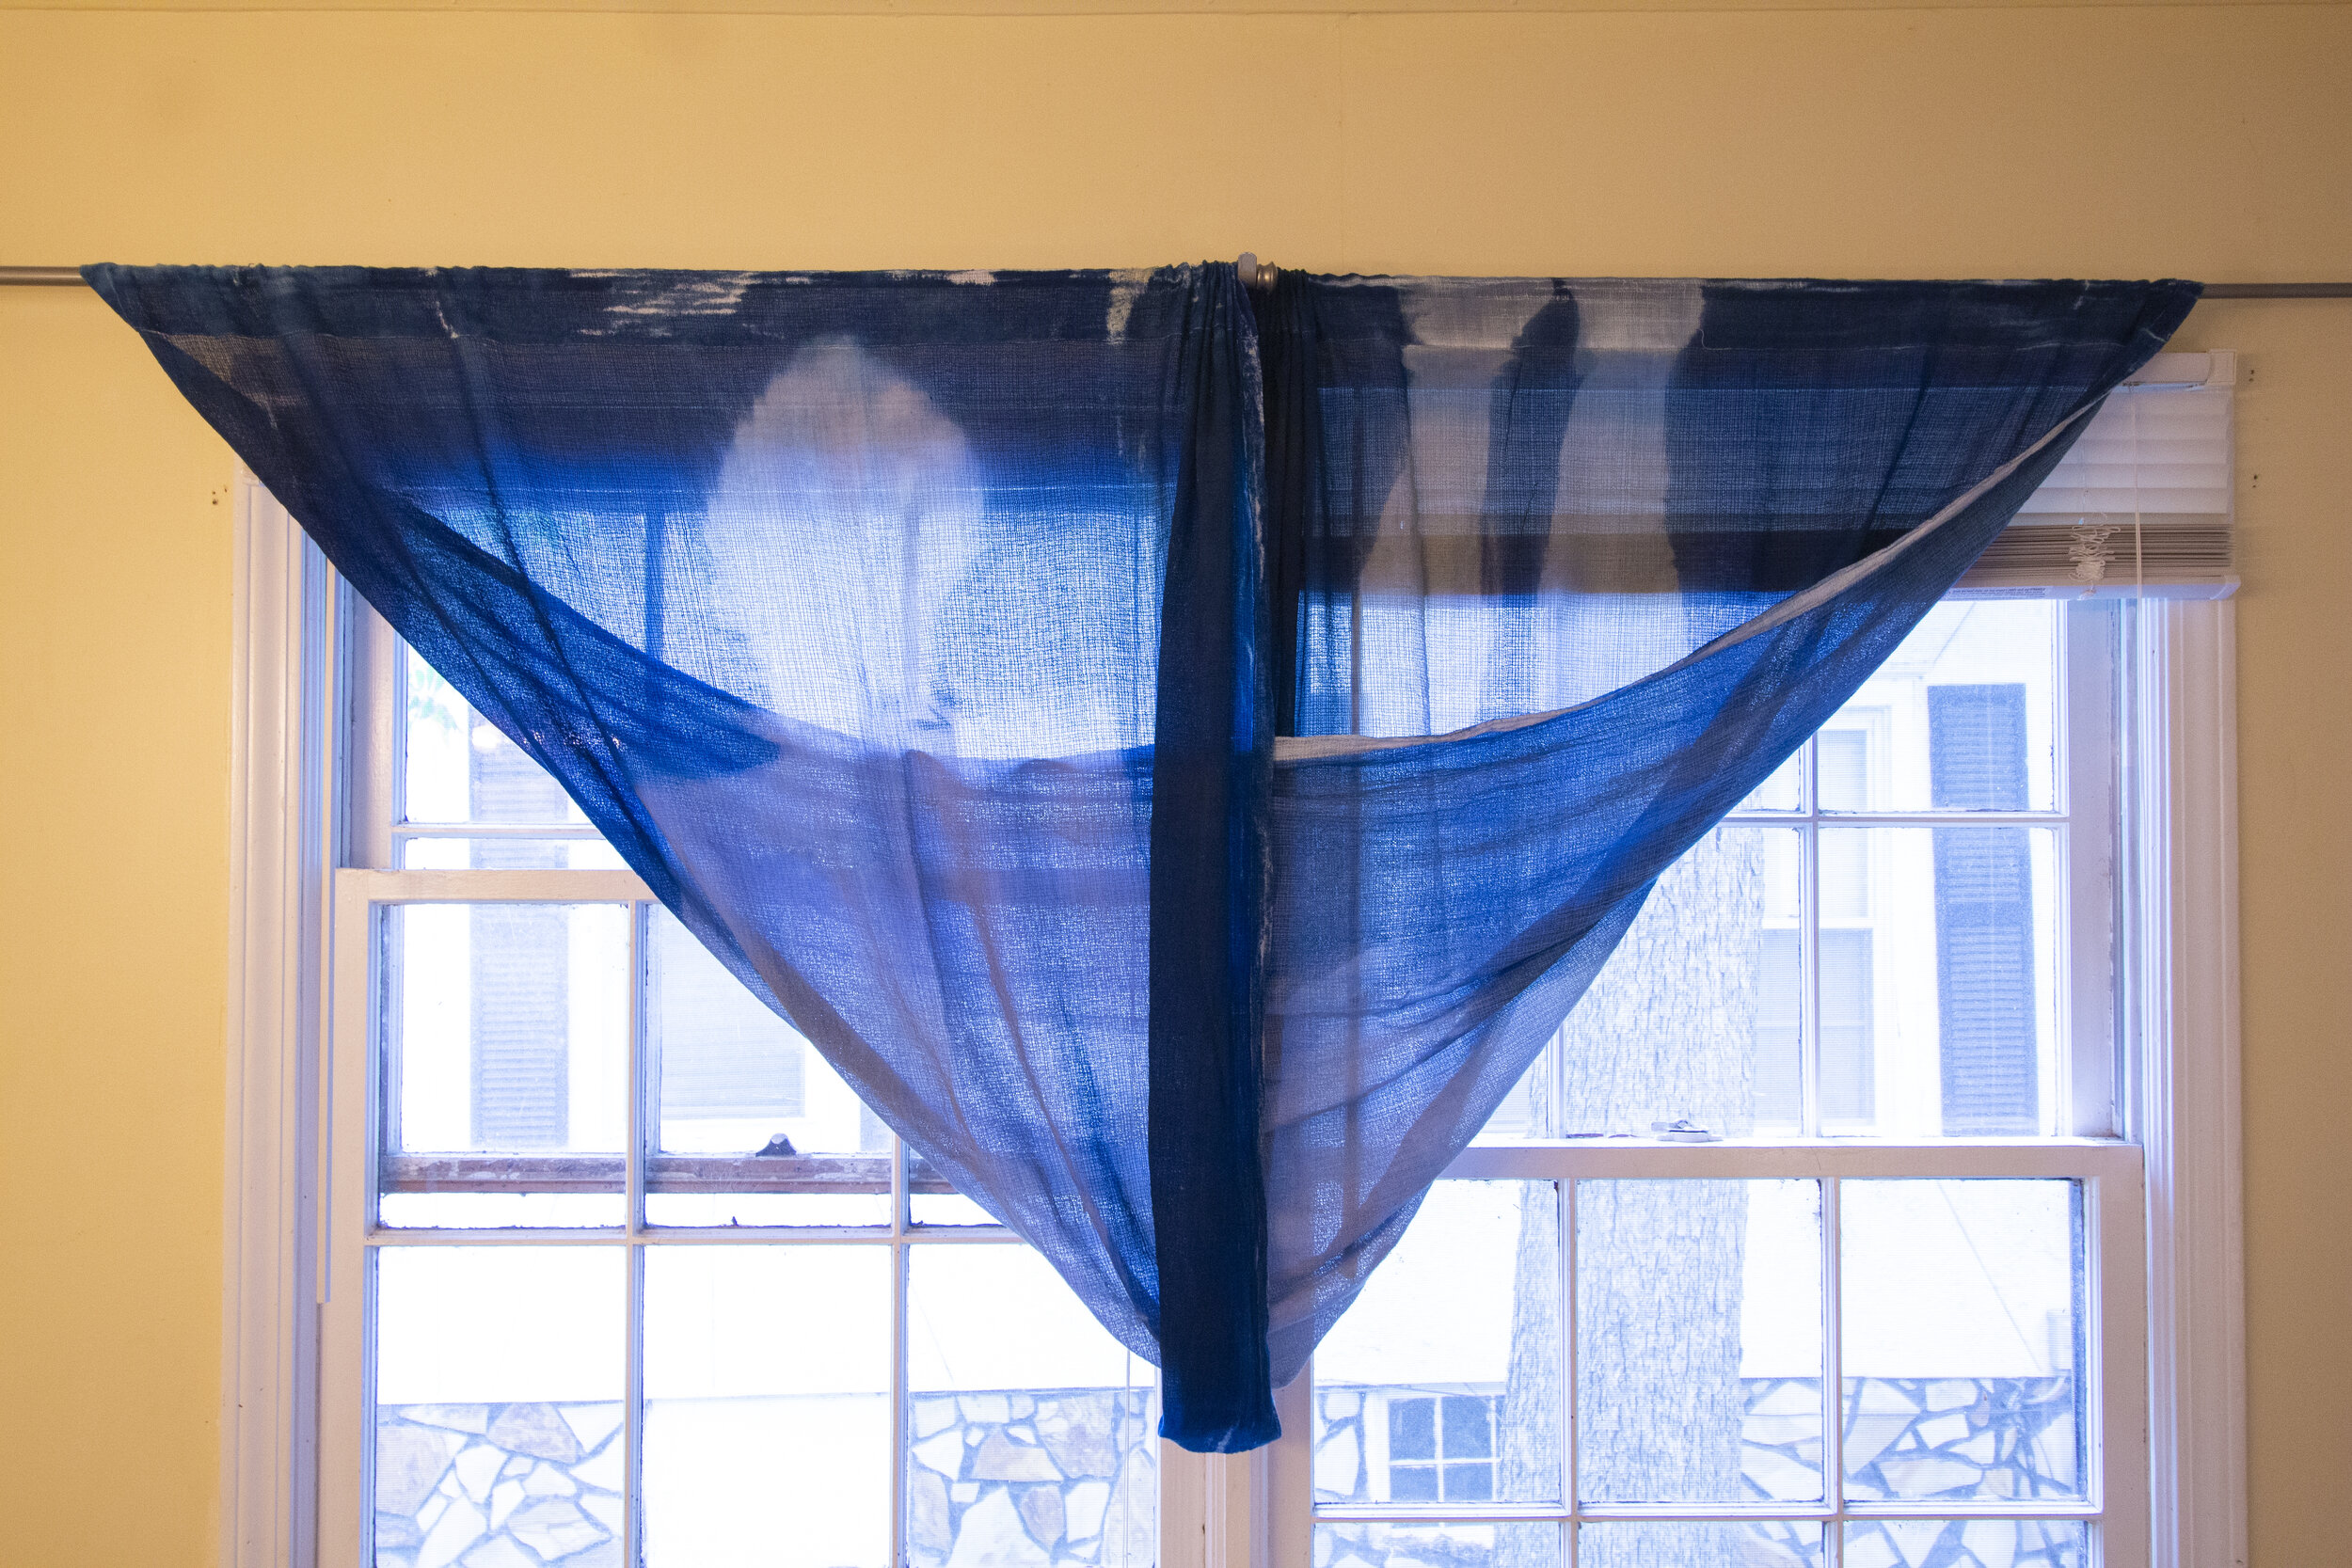 Full Twist [midday], 2020, cotton curtain, cyanotype solution, curtain rod, and hardware, 110 x 42 inches